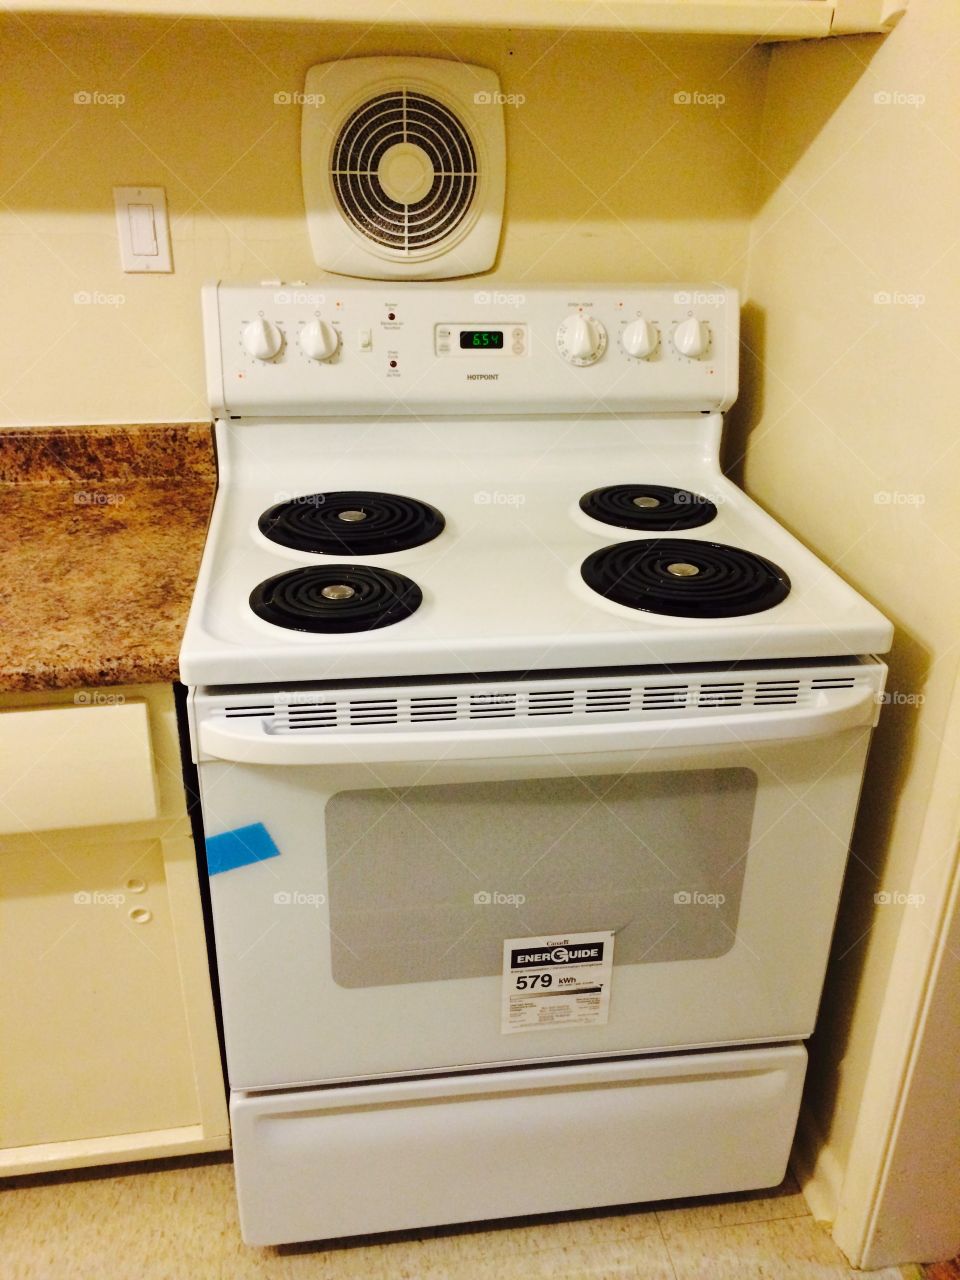 Great cooking ahead with a new HOTPOINT stove!